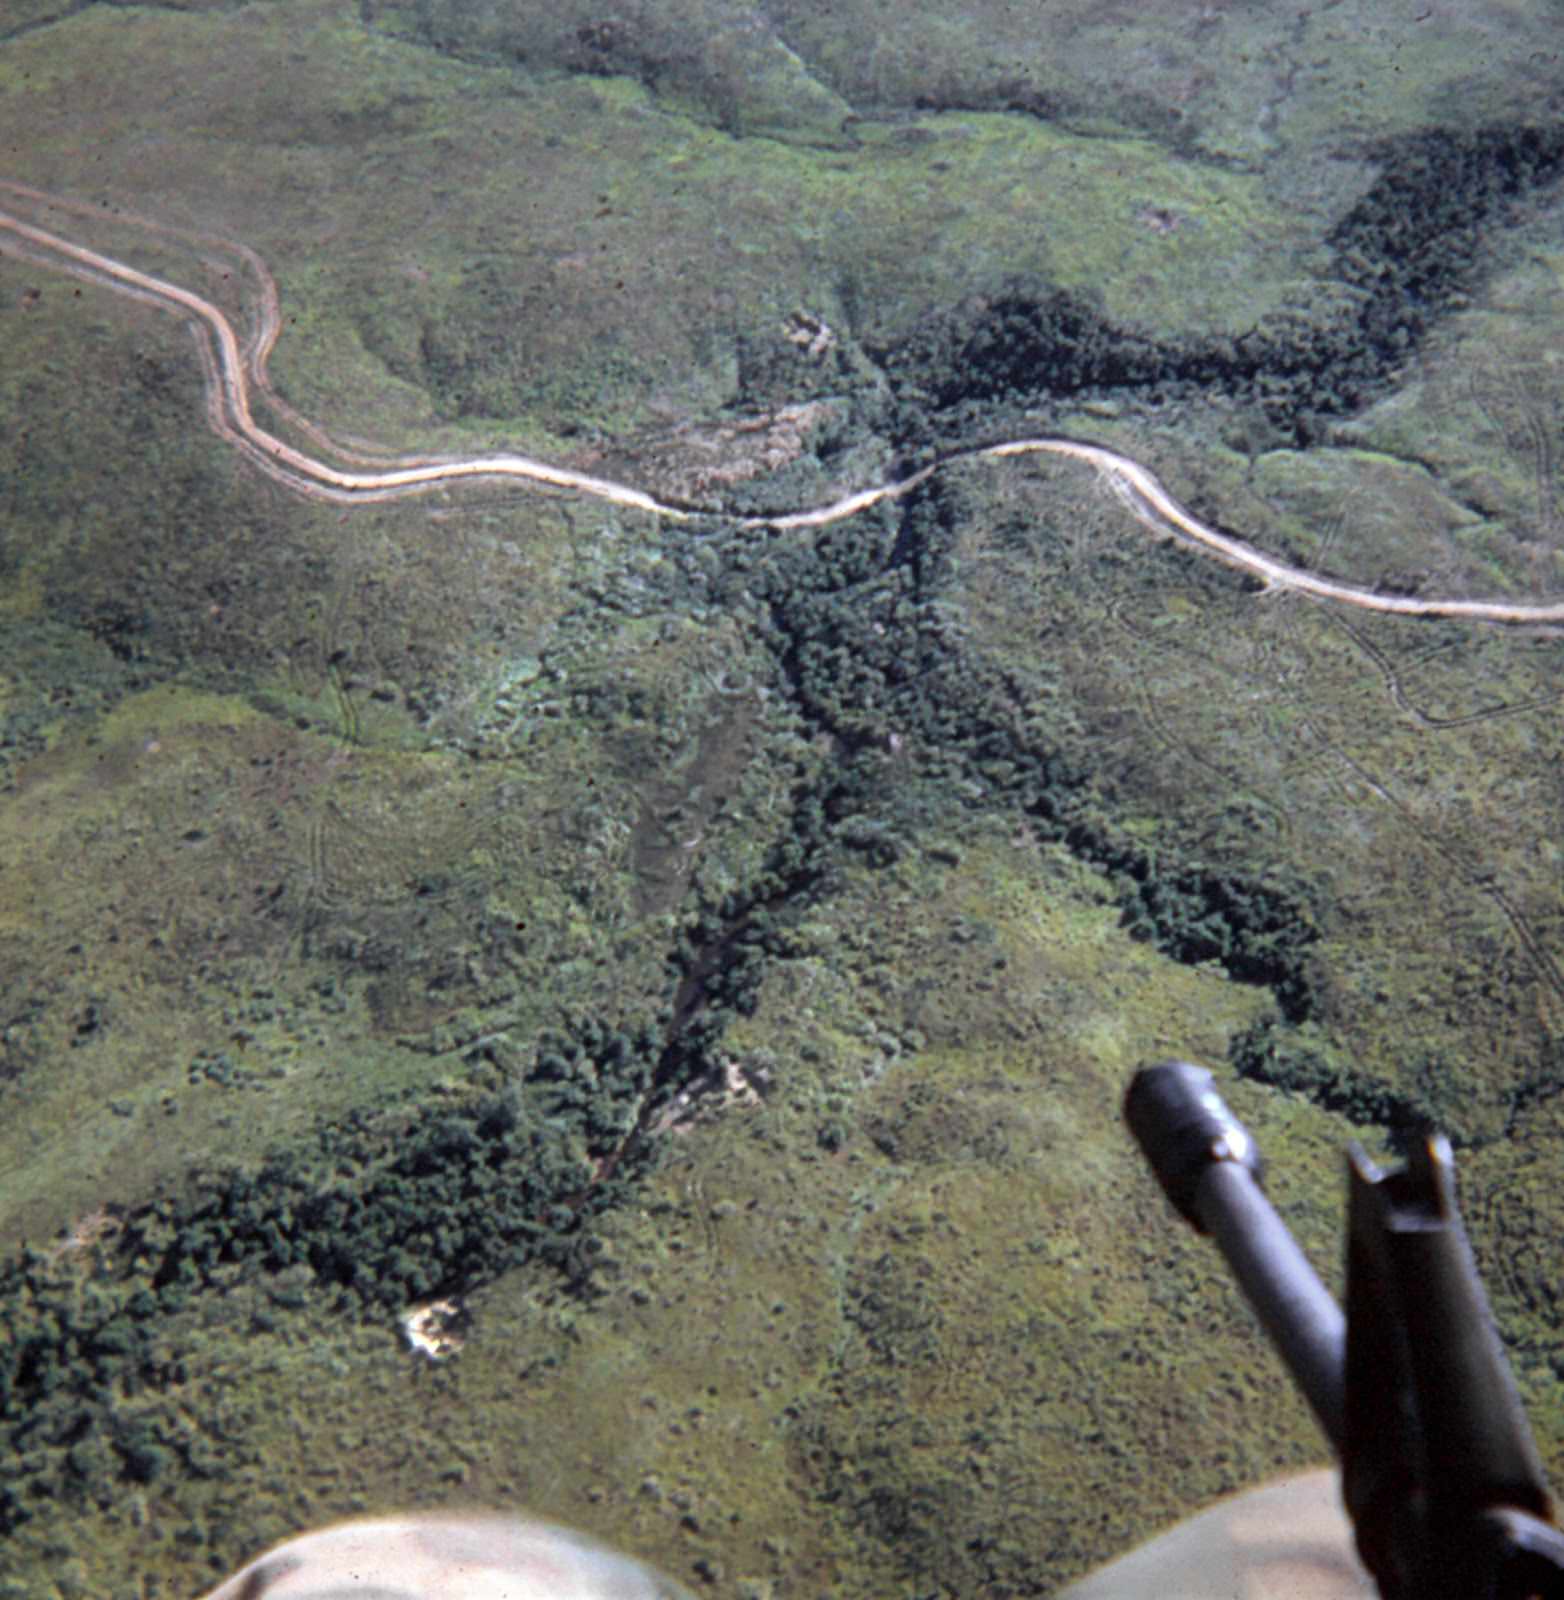 The Quang Tri River seen from a Huey helicopter. Vietnam.